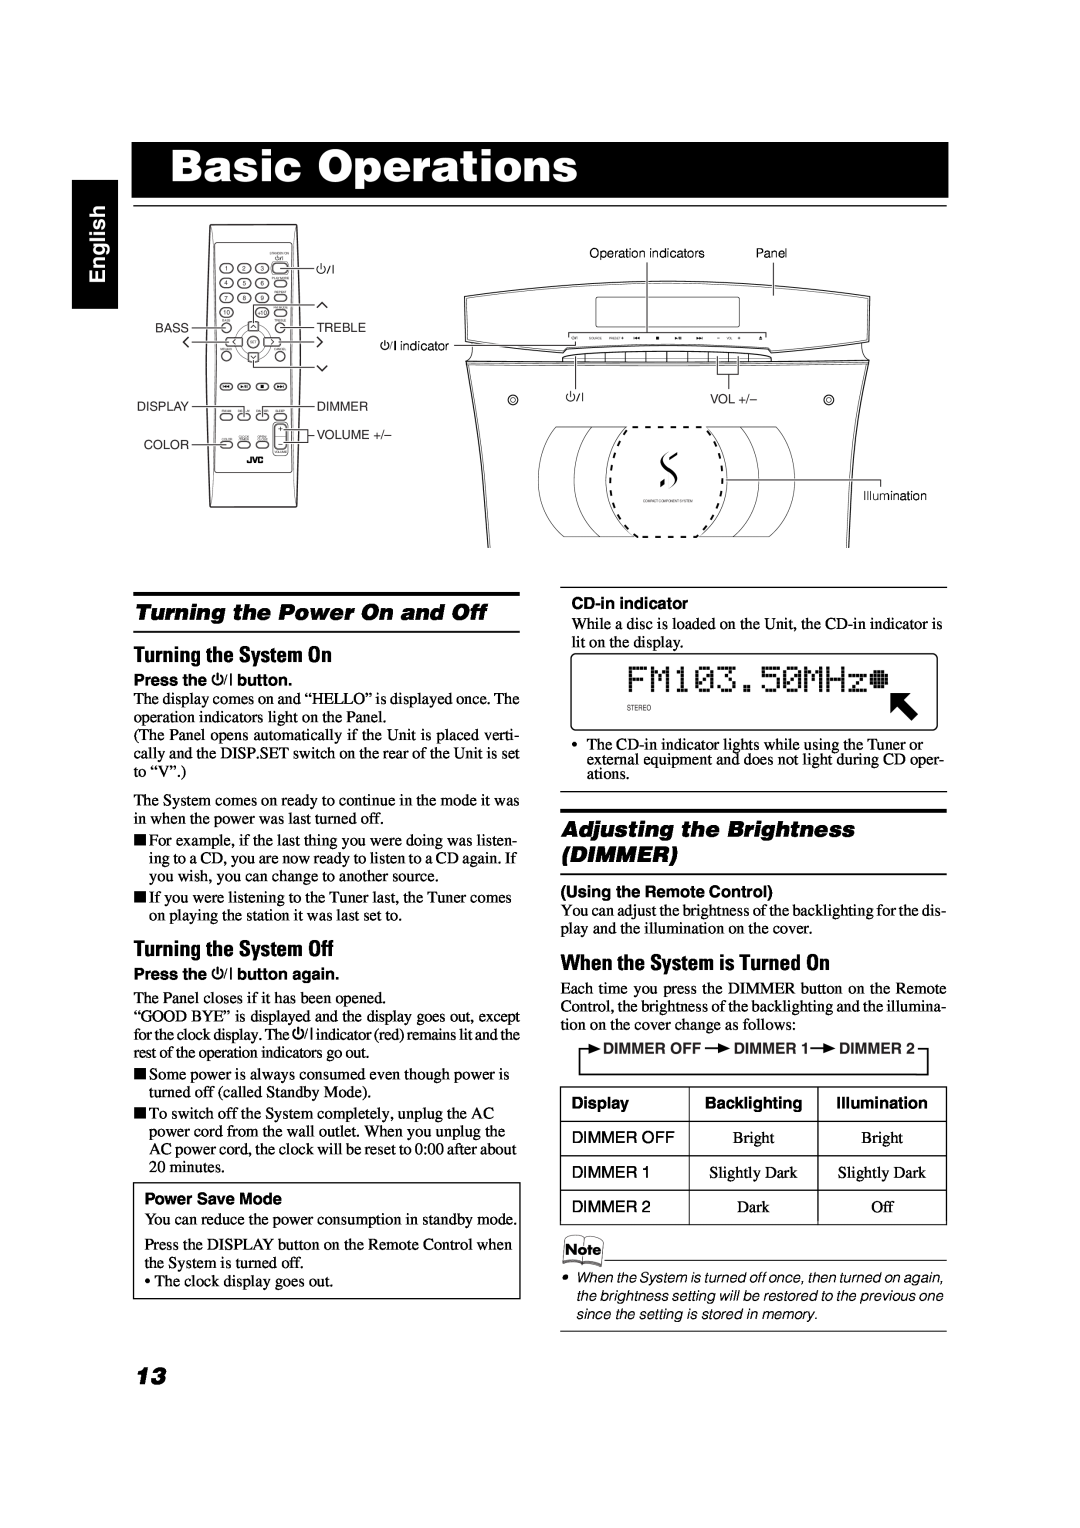 JVC VS-DT2000 manual Basic Operations, English, Turning the Power On and Off, Turning the System On, Turning the System Off 